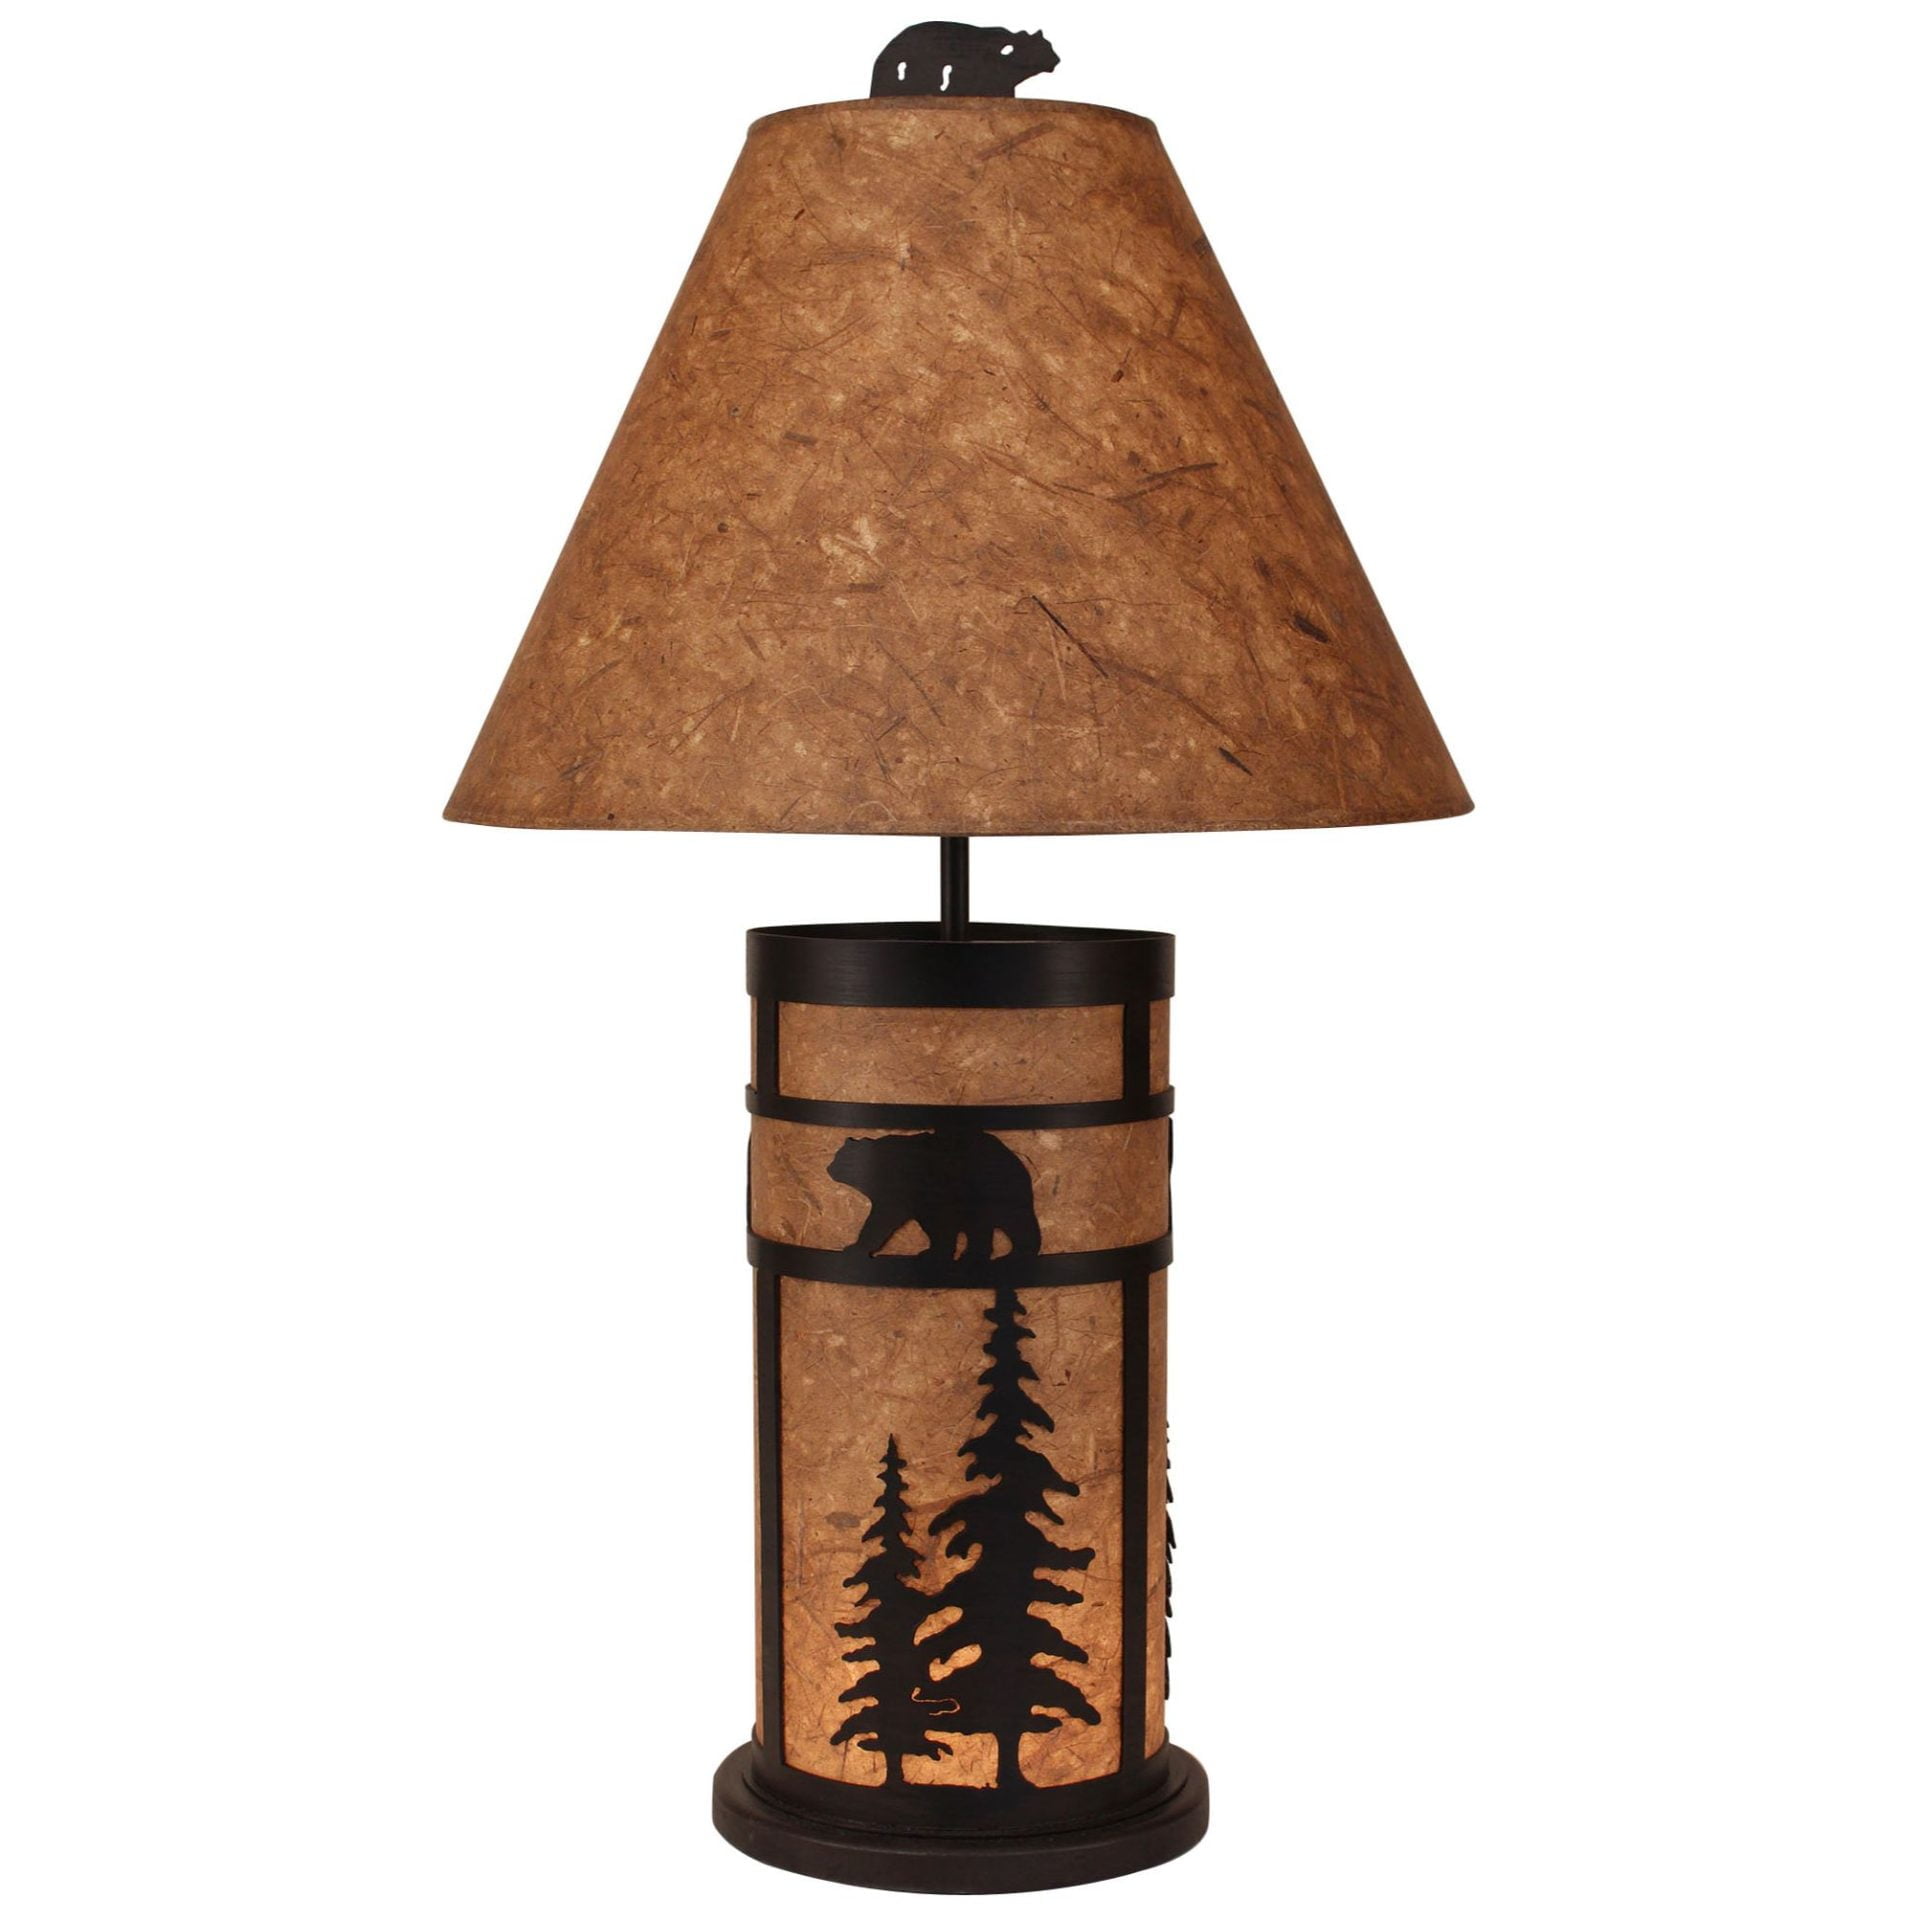 Large Mission-Style Table Lamp with Nightlight